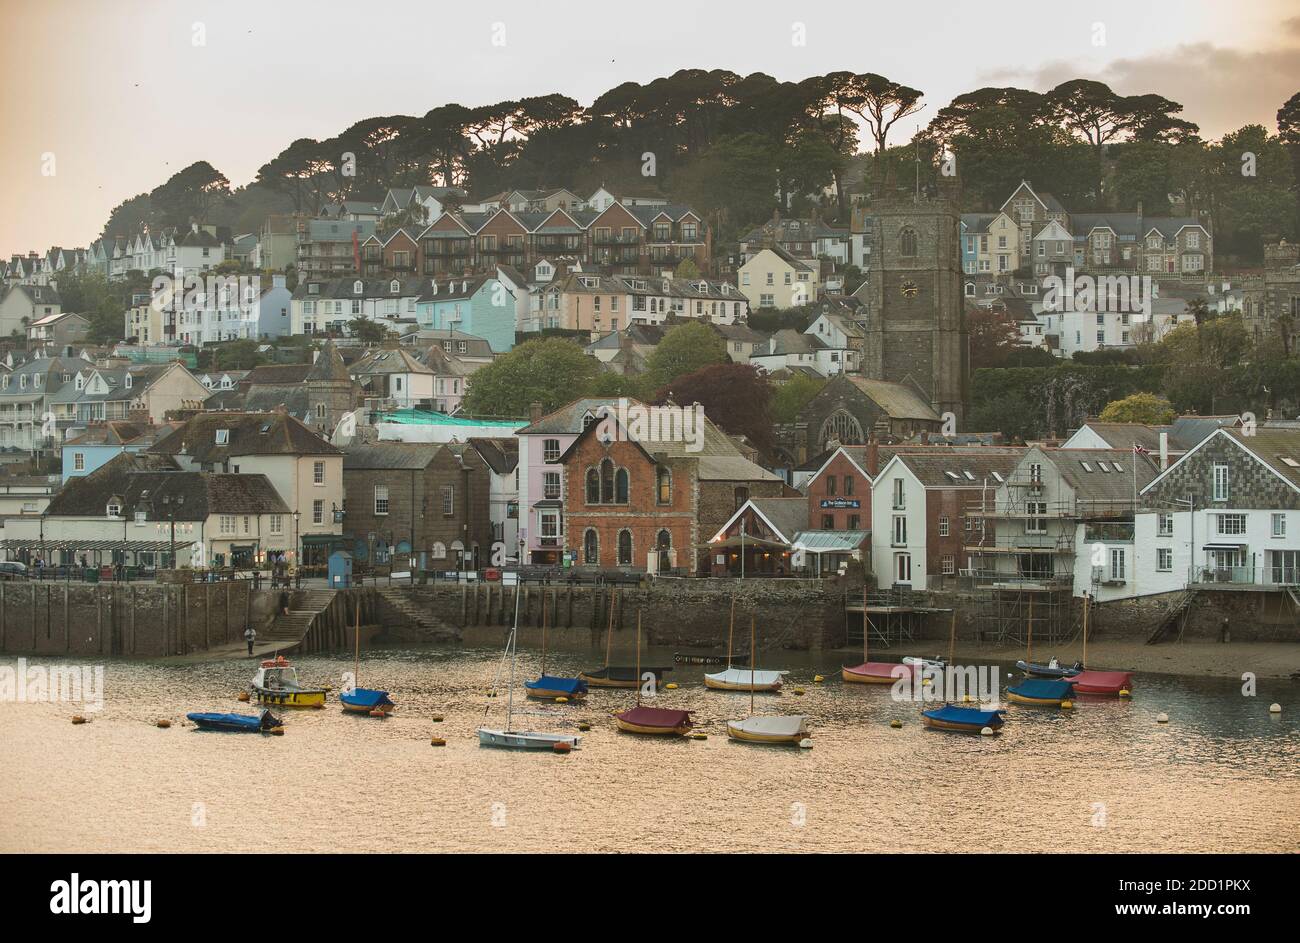 Small boats are anchored in front of the small coastal town of Fowey, Cornwall, England. Stock Photo